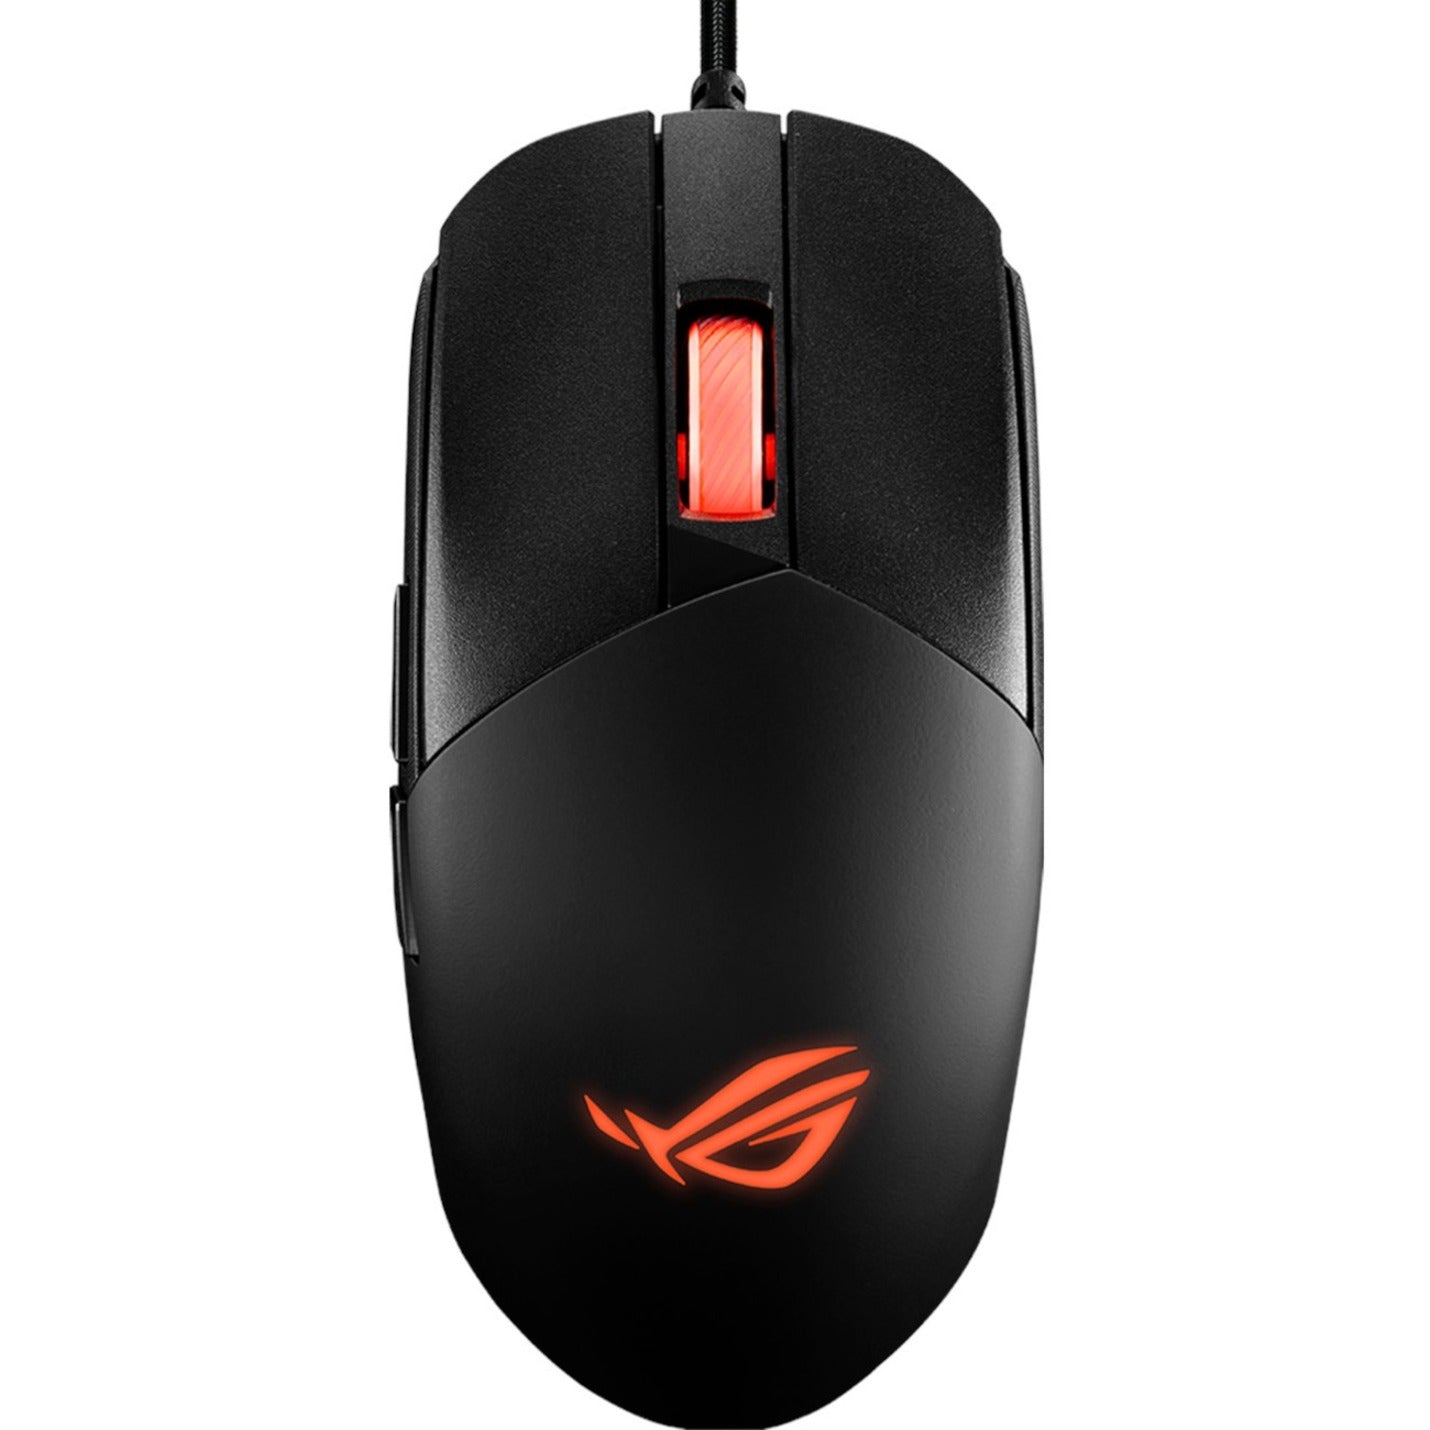 Asus ROG P518 ROG STRIX IMPACT III Gaming Mouse, Semi-Ambidextrous, Wired, Lightweight, 12000 DPI sensor, 5 programmable buttons, Replaceable switches, Paracord cable, FPS gaming mouse, Black